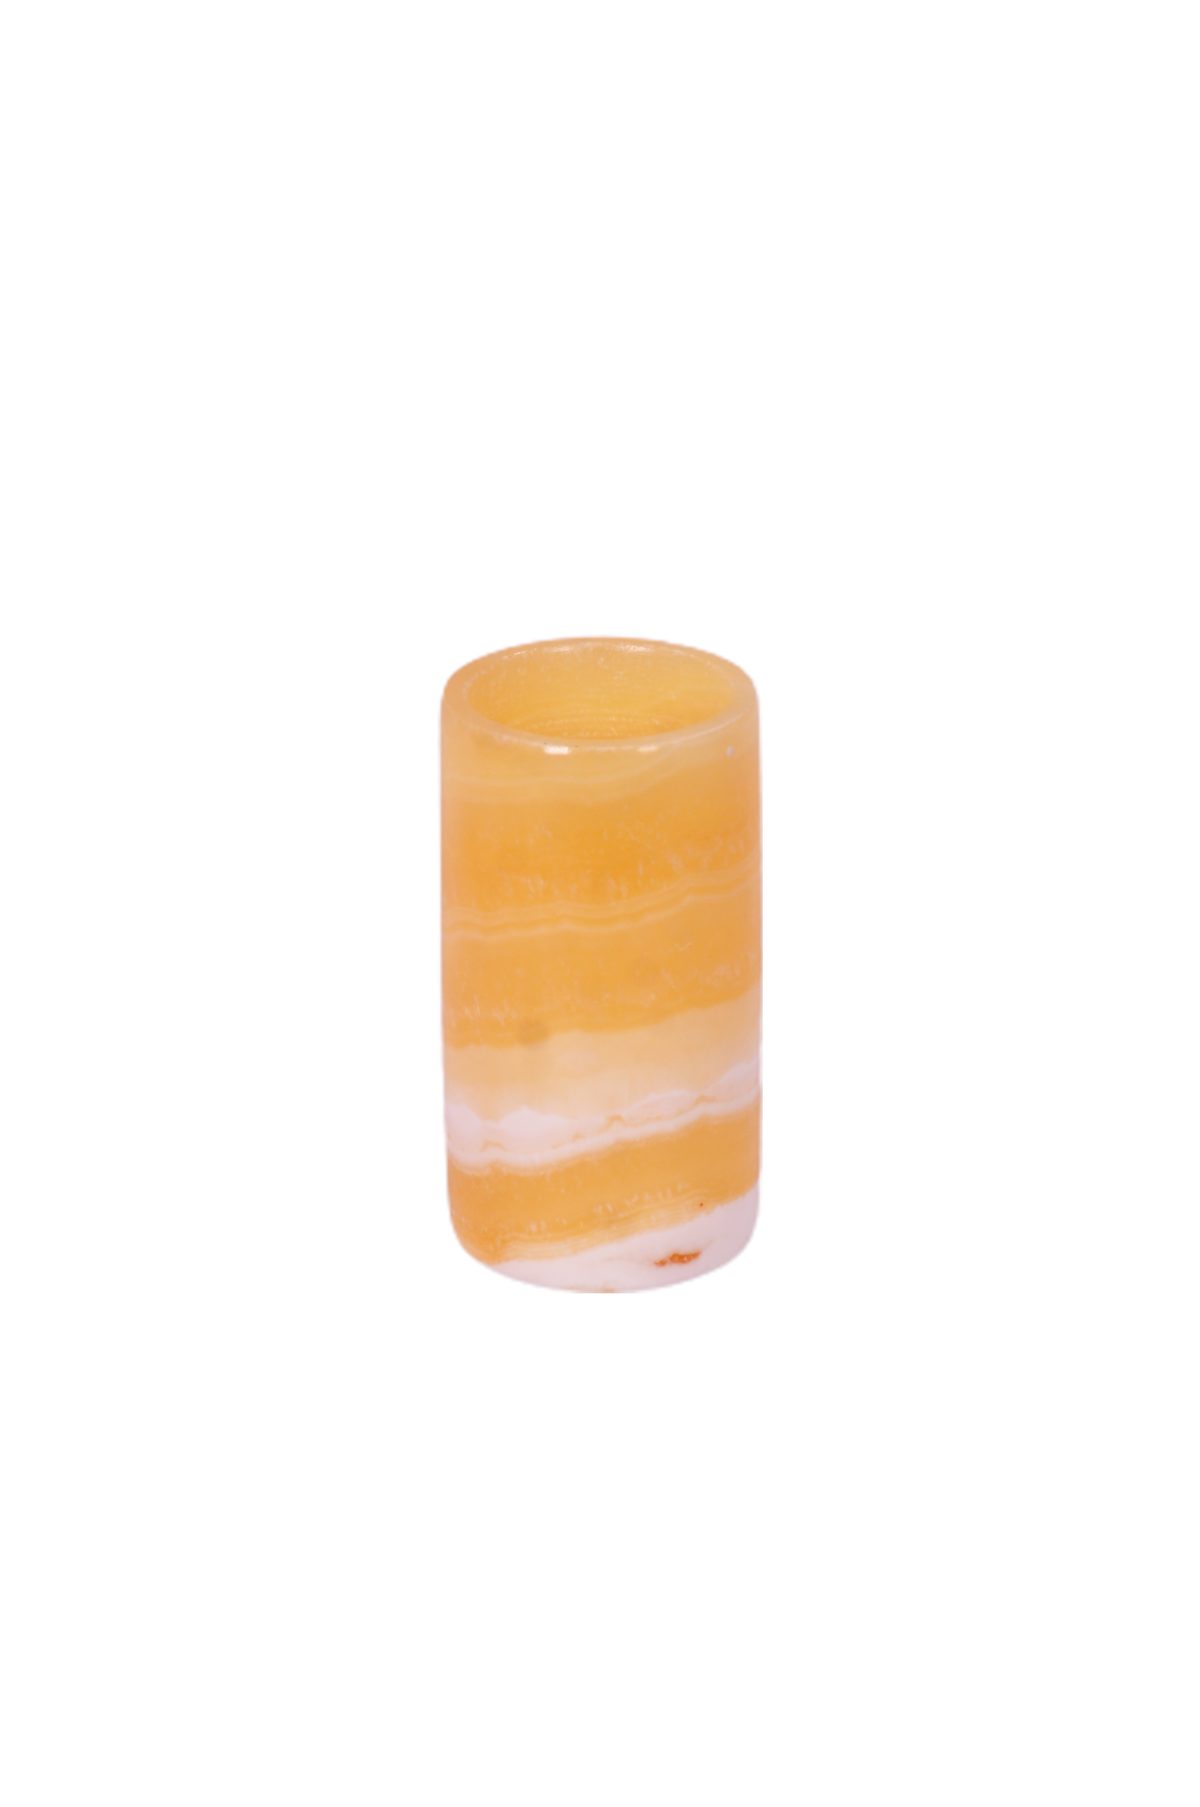 4 40 scaled Natural alabaster stone handmade small candle